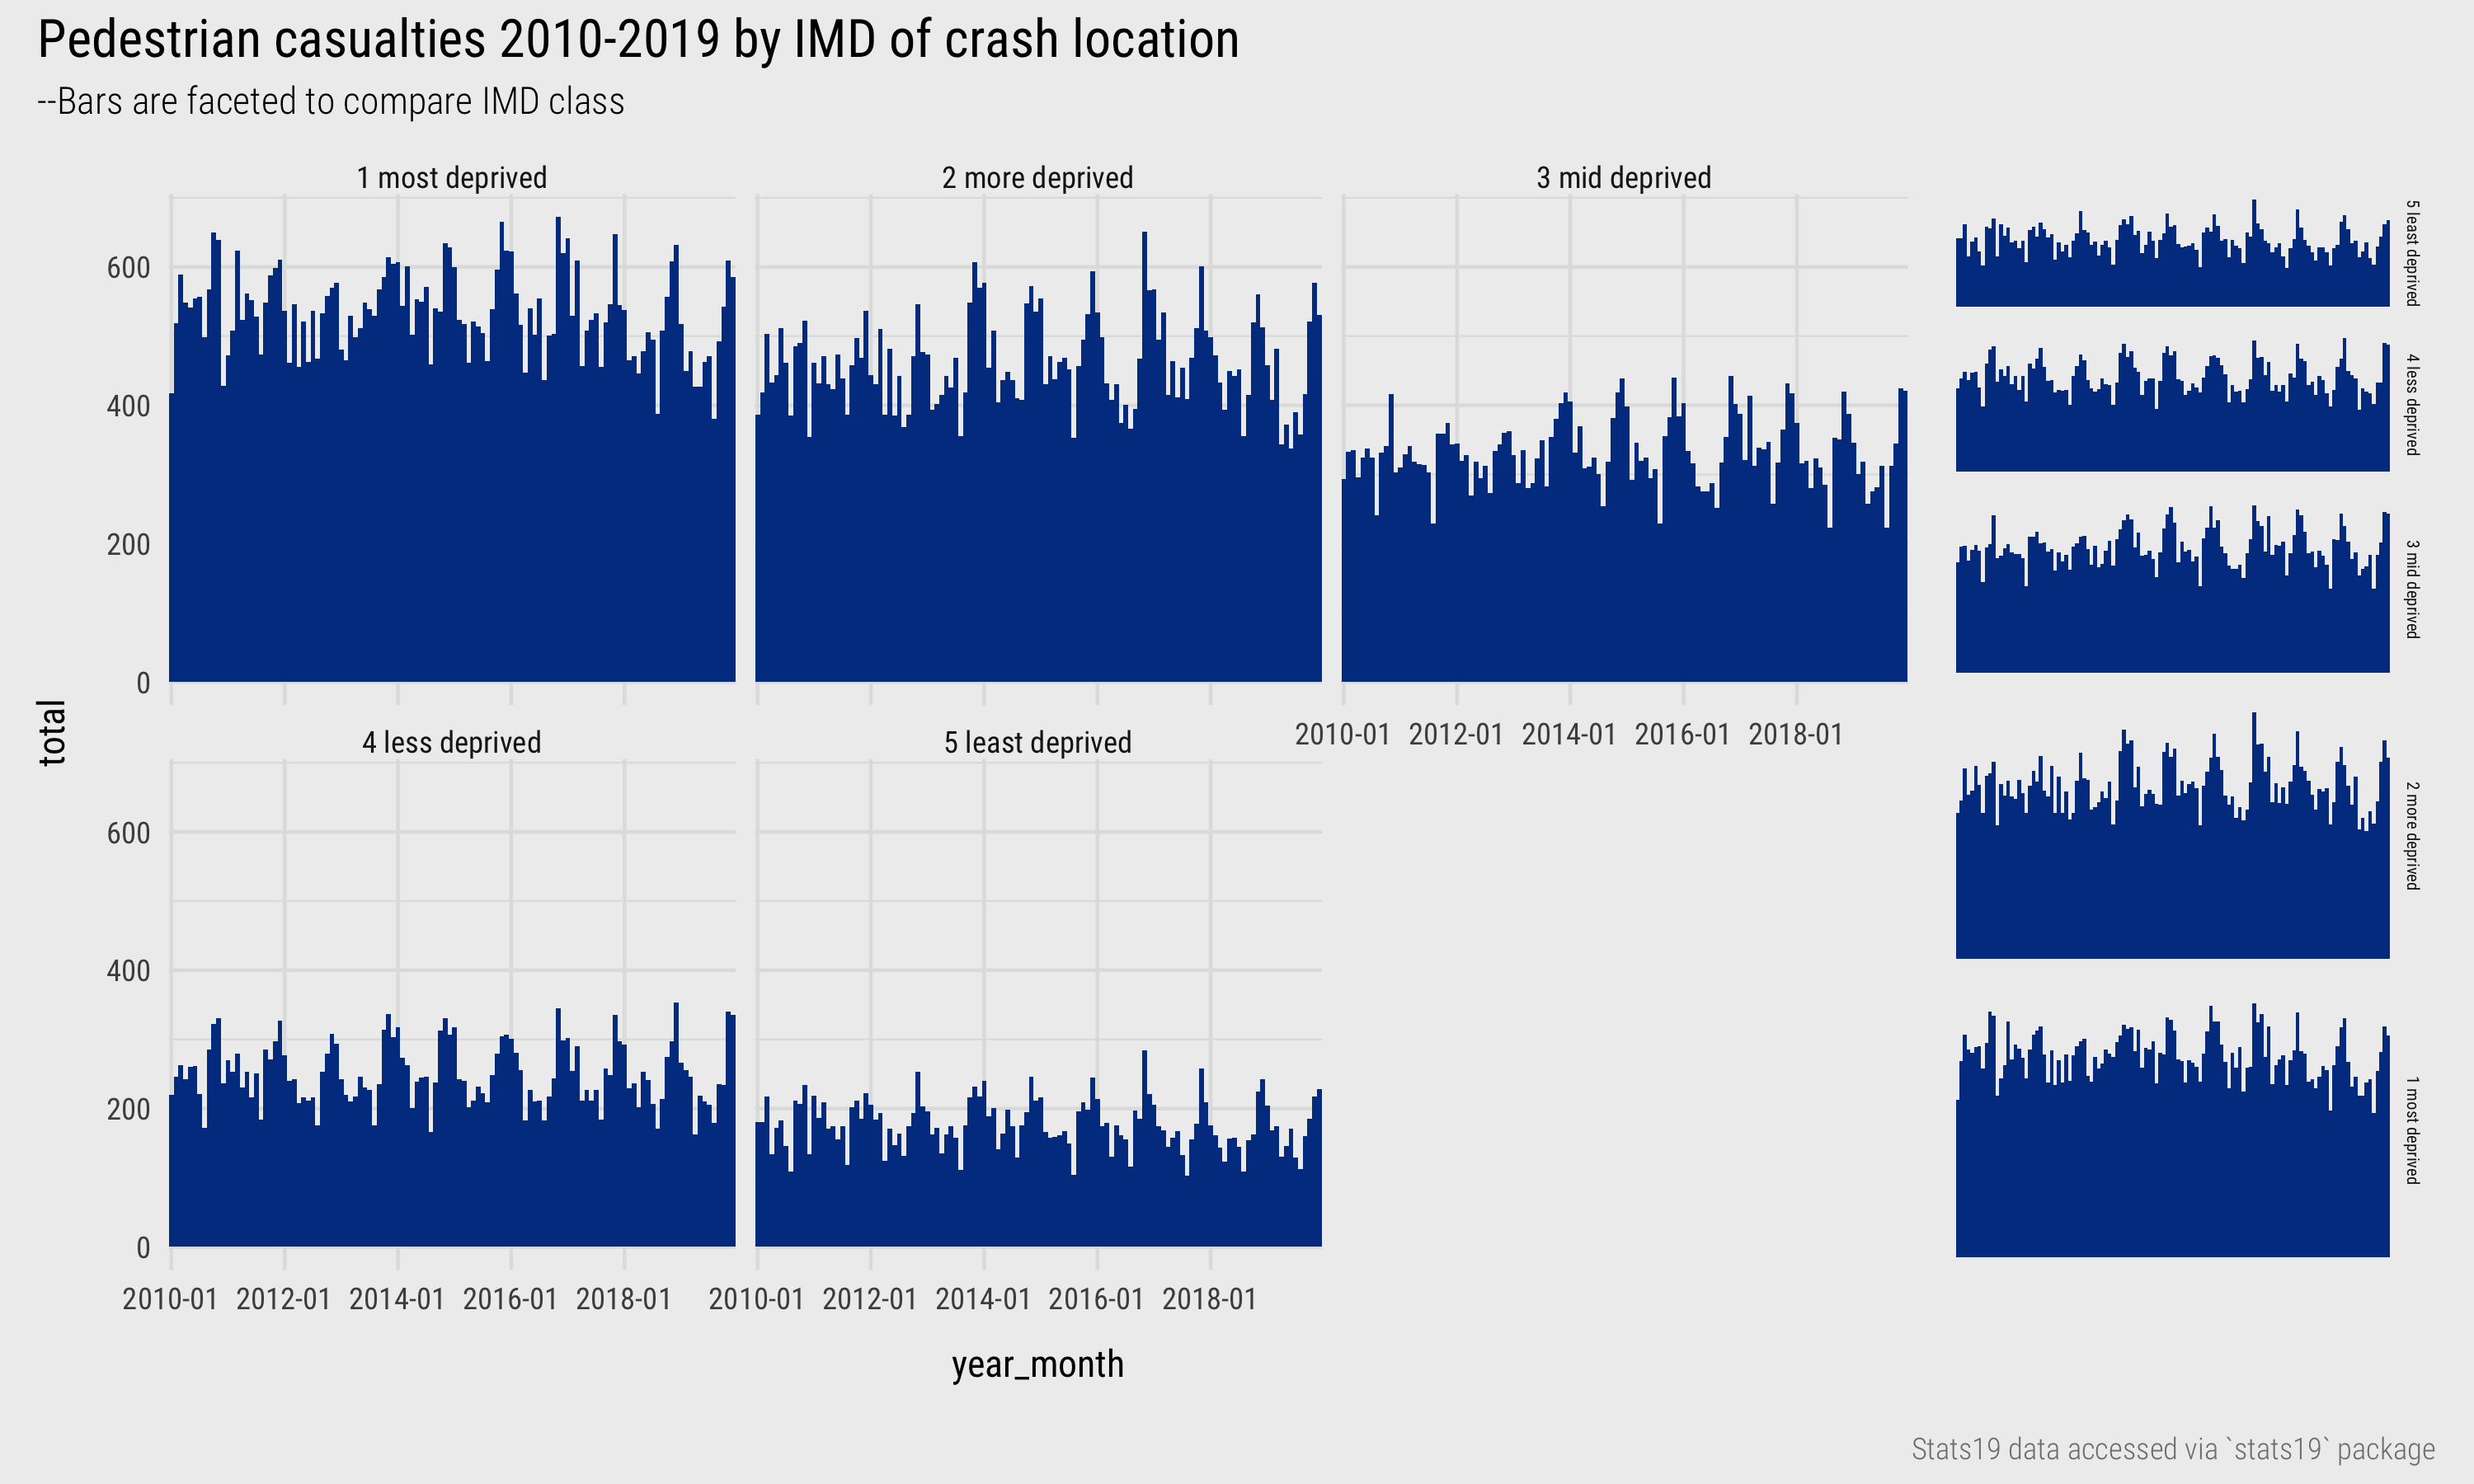 Pedestrian casualties by year and IMD.